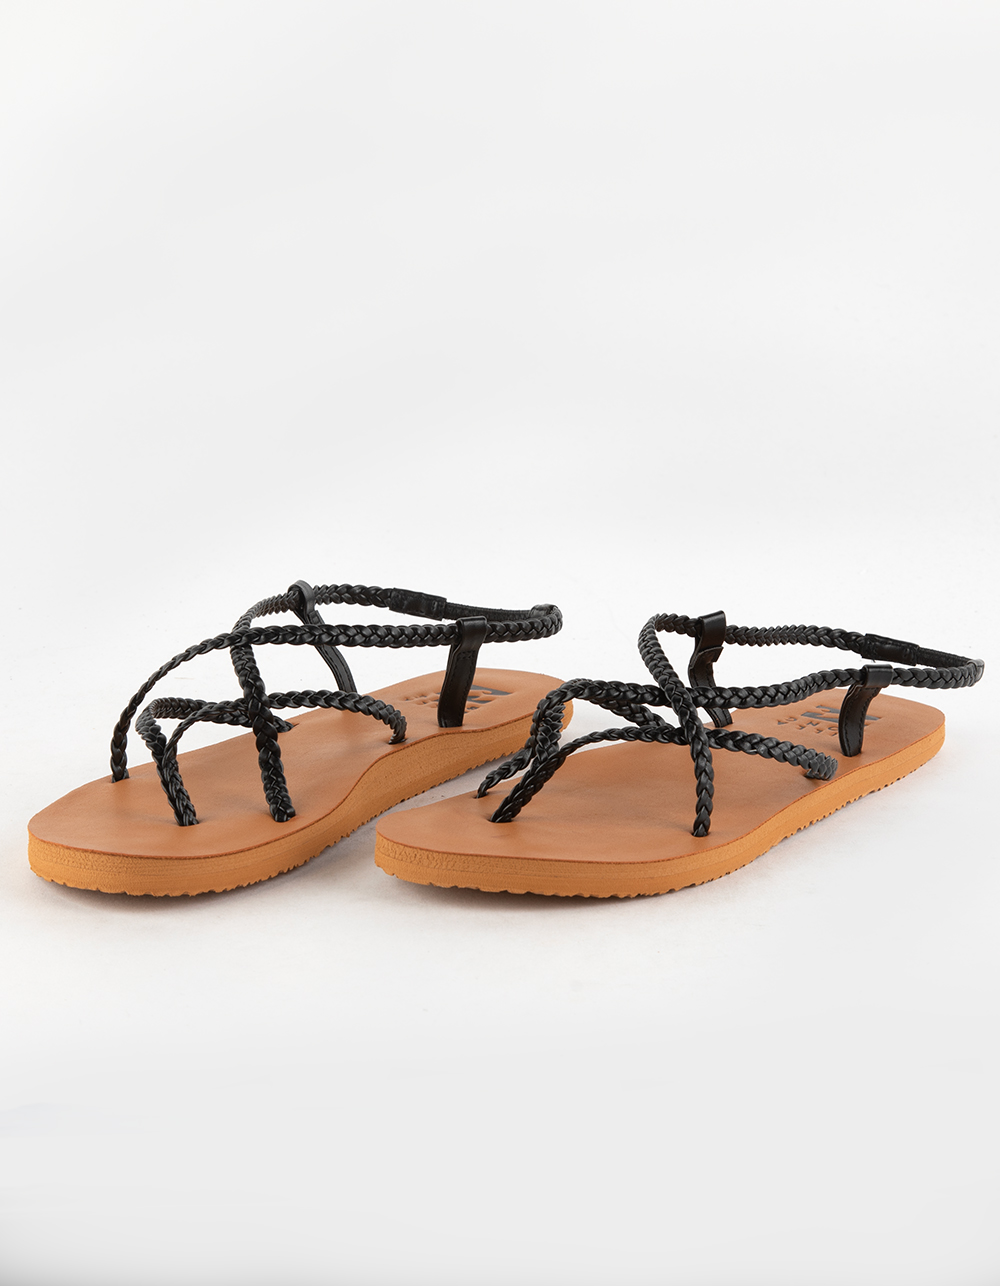 BILLABONG Crossing By Womens Braided Sandals